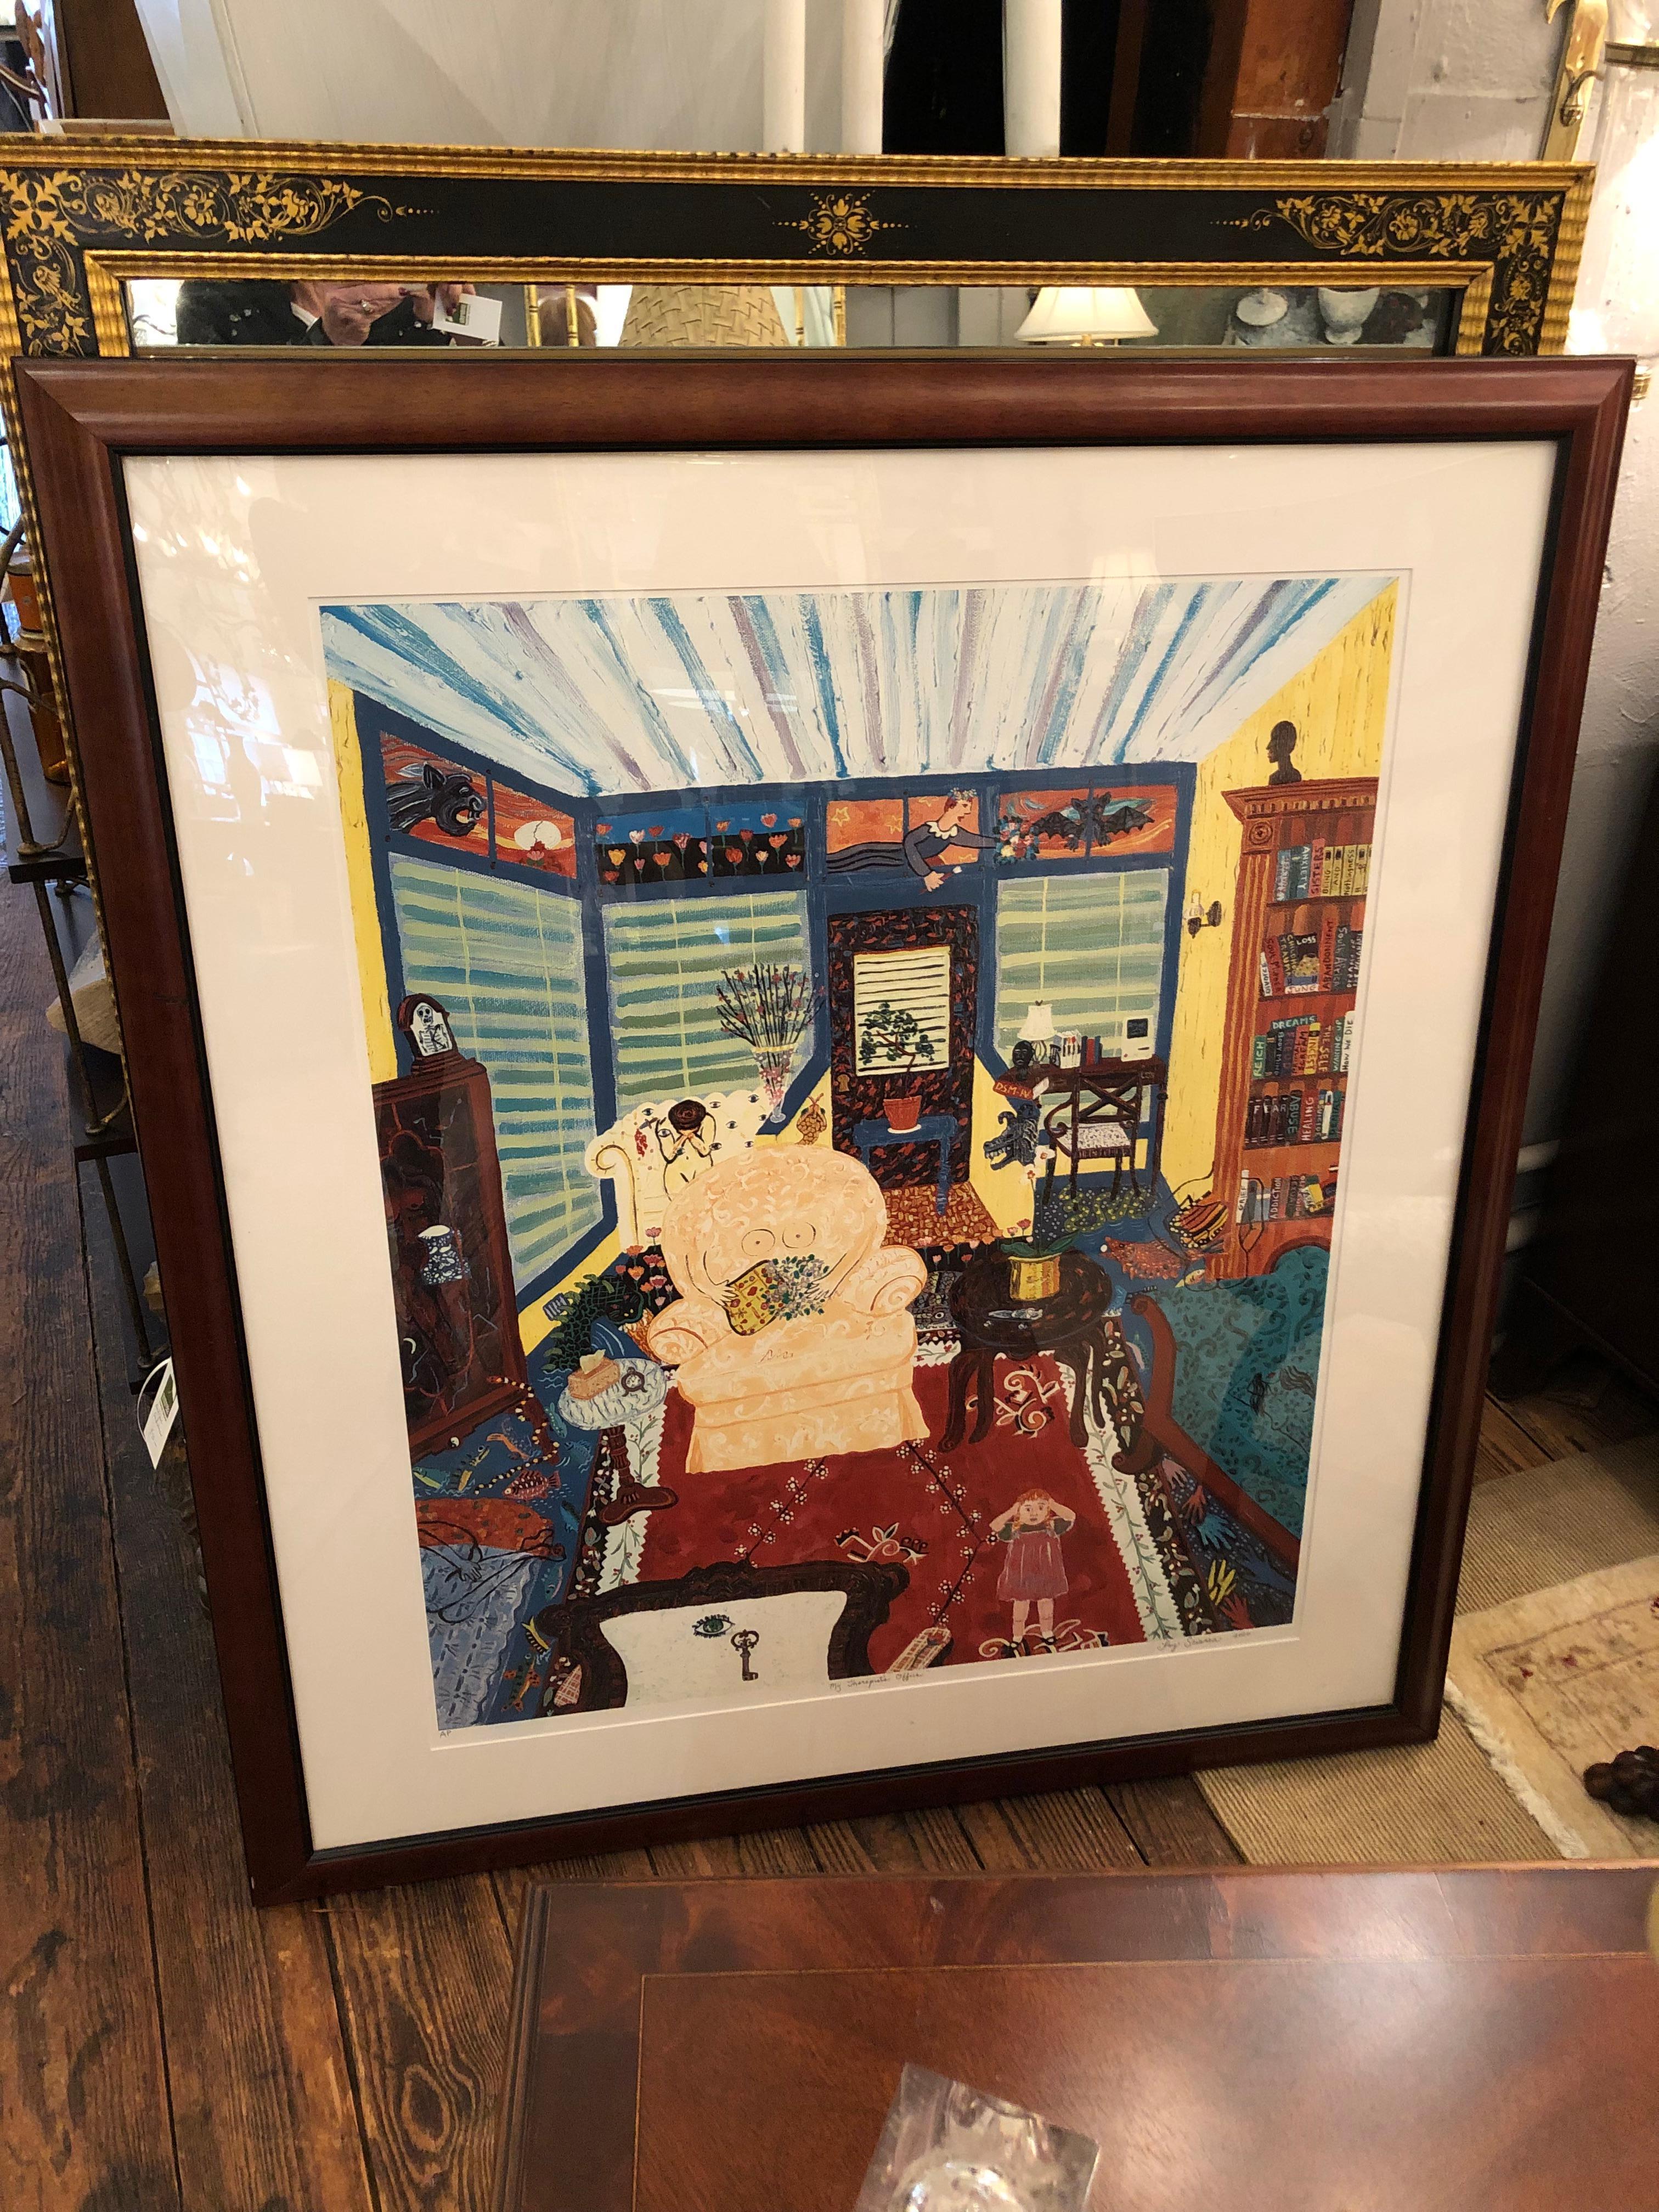 Striking and meticulously detailed signed Artist Proof of the interior of a therapist's office, which imaginatively renders the healing processes that occur there. Frame is a dark wood and the fine art print is handsomely matted.